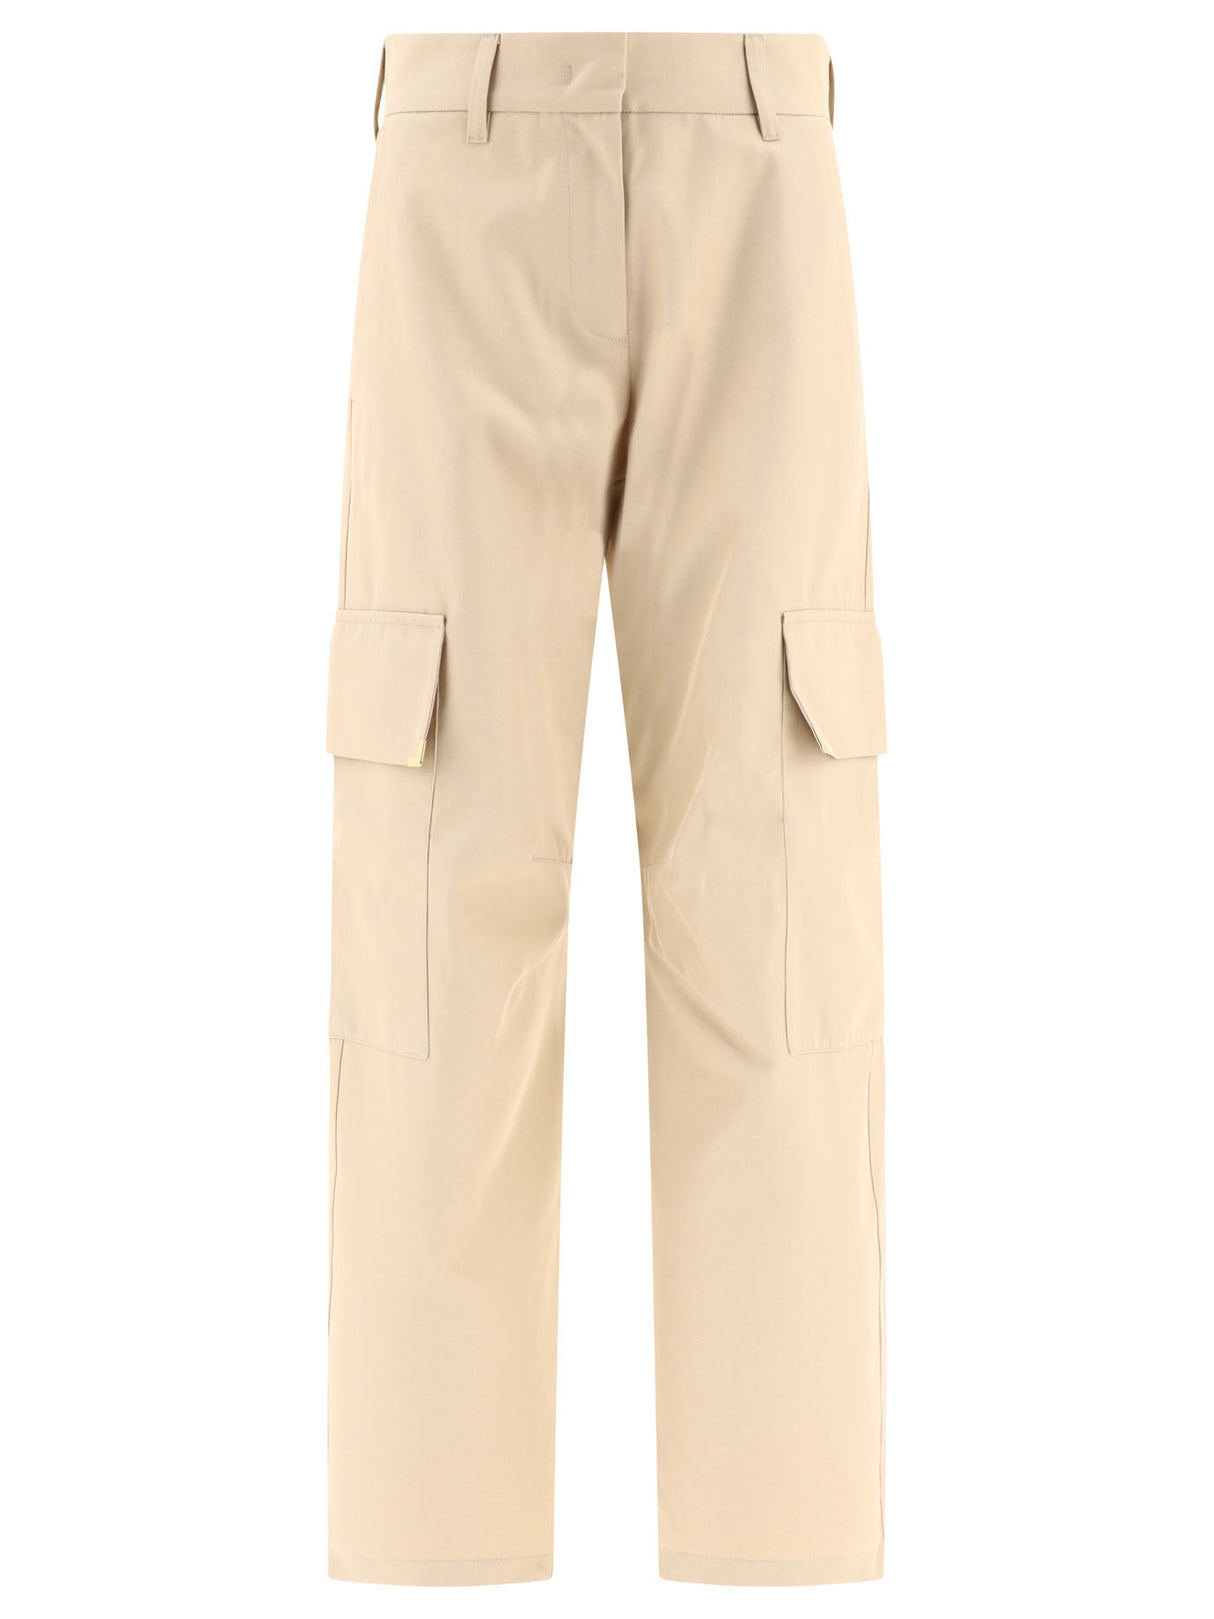 PALM ANGELS Beige Cargo Trousers for Women